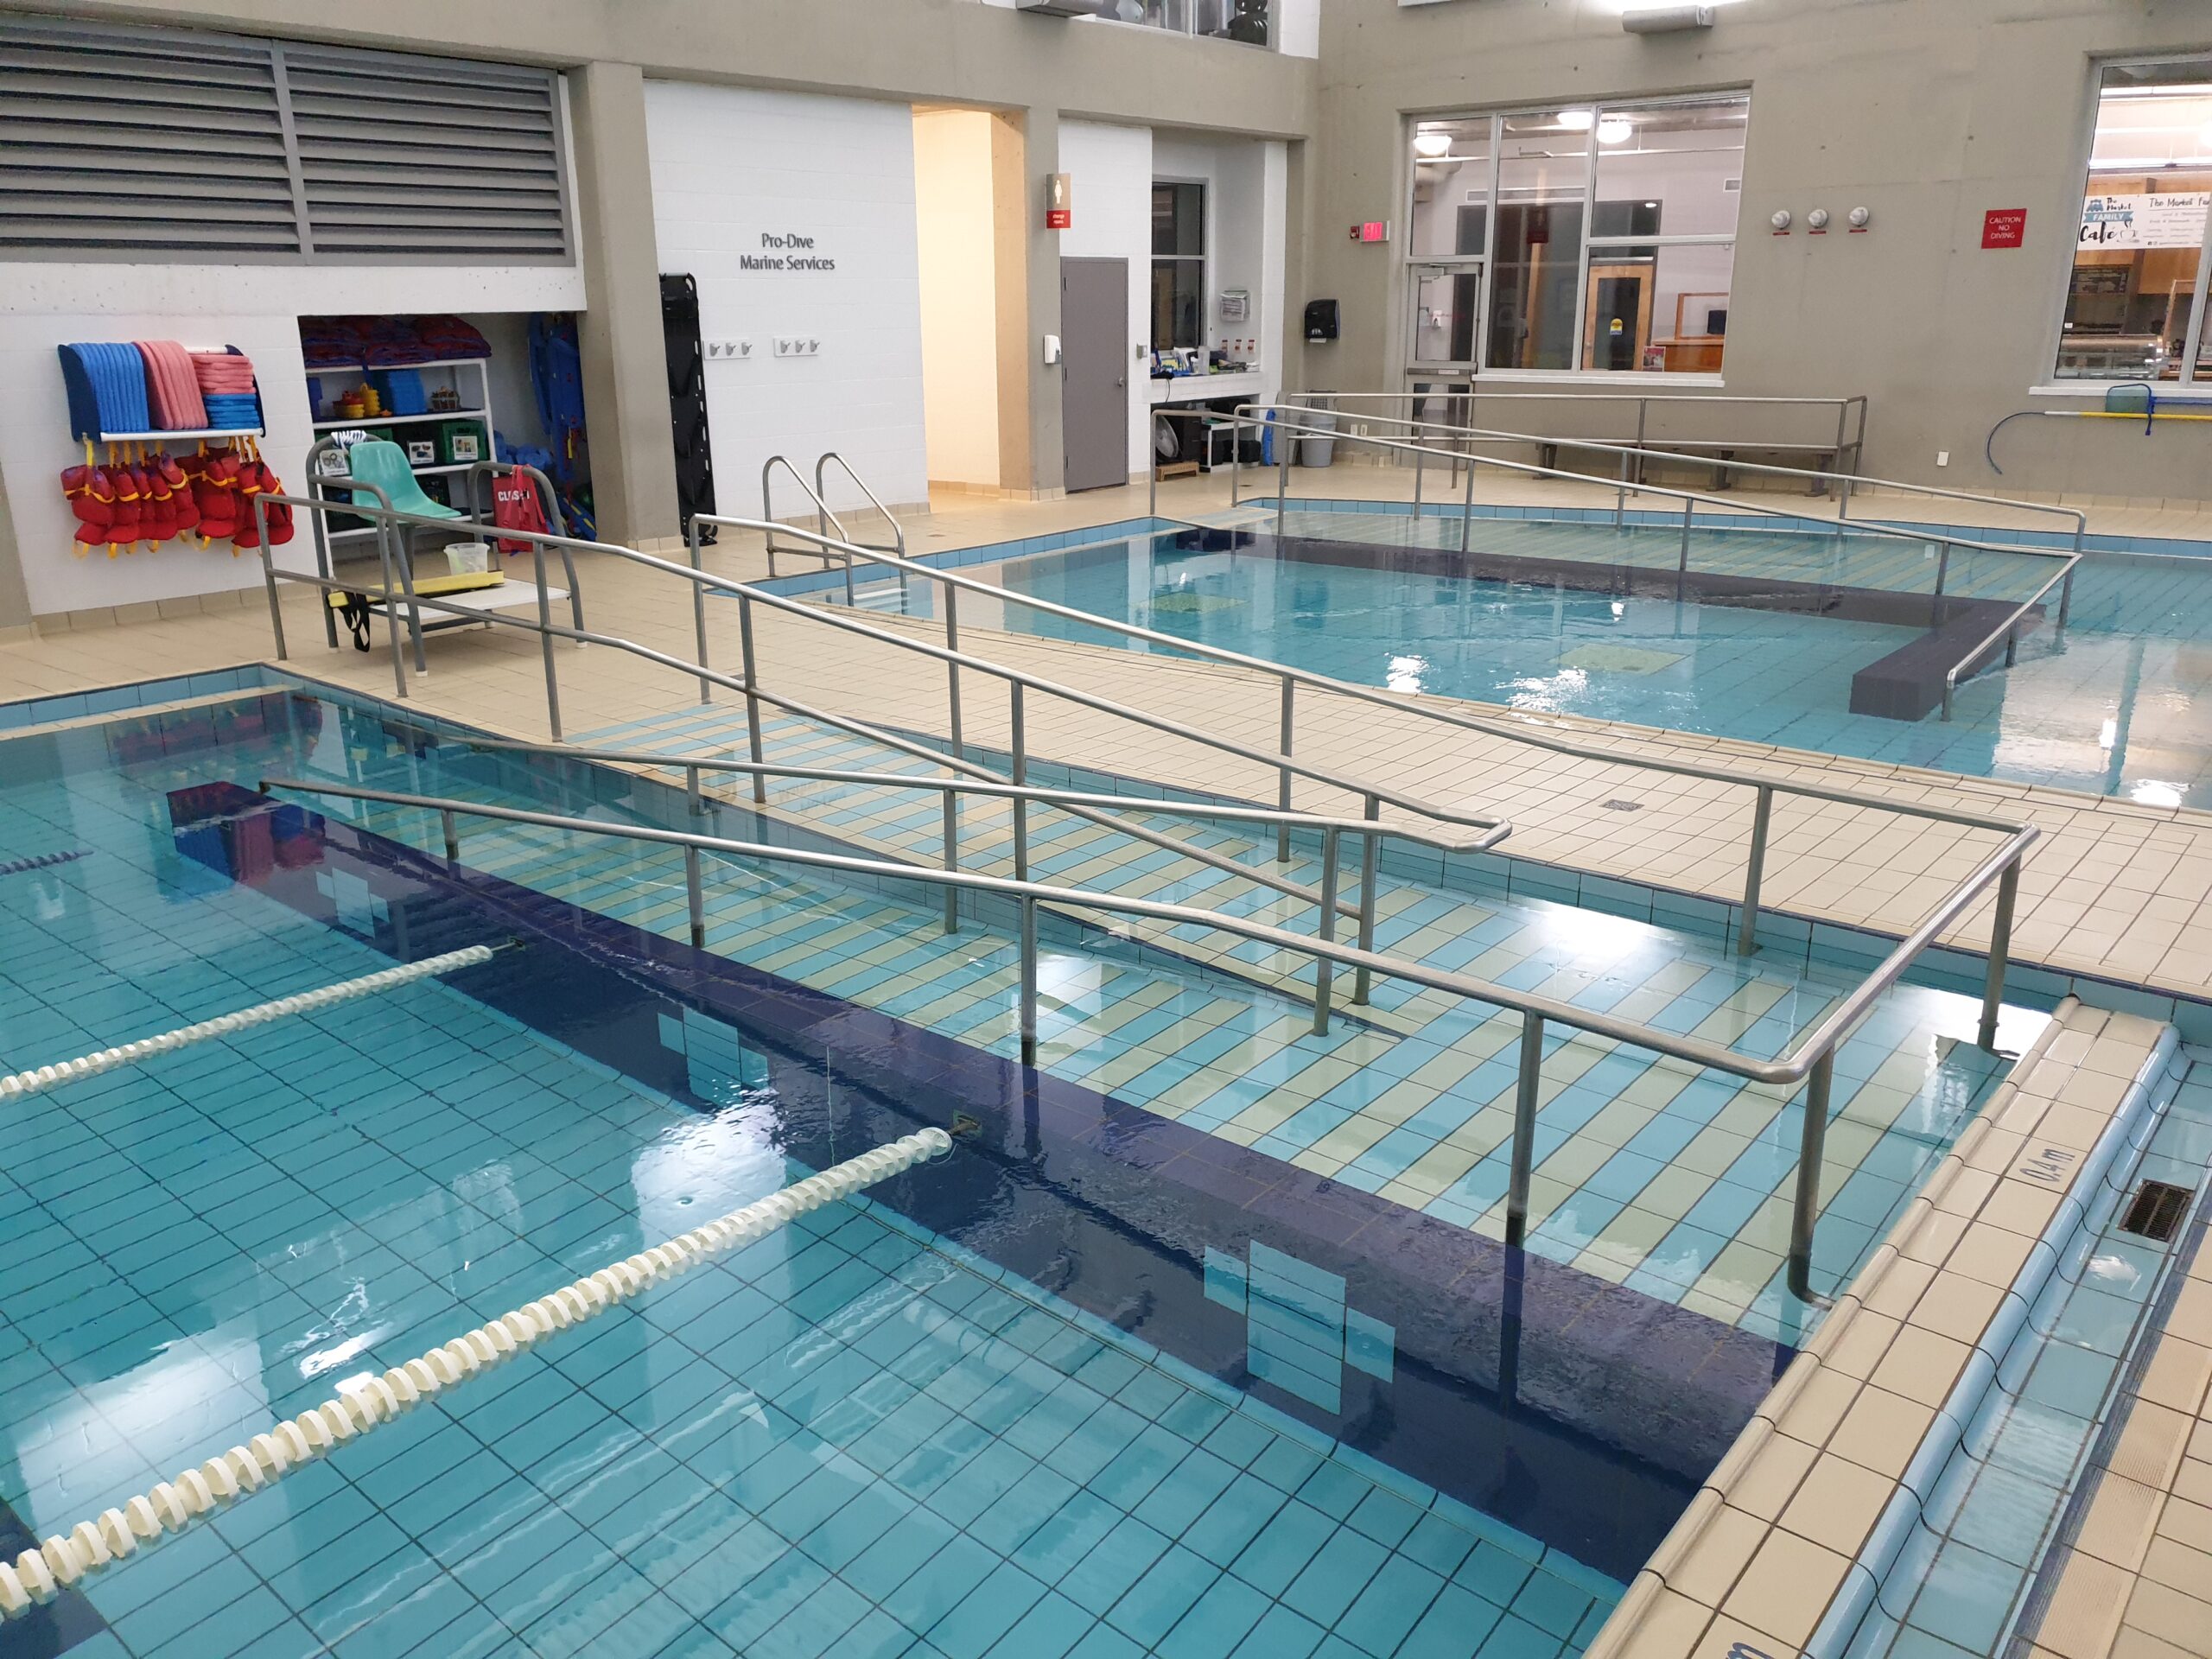 a wide angle view of a pool deck that has two pools with ramps